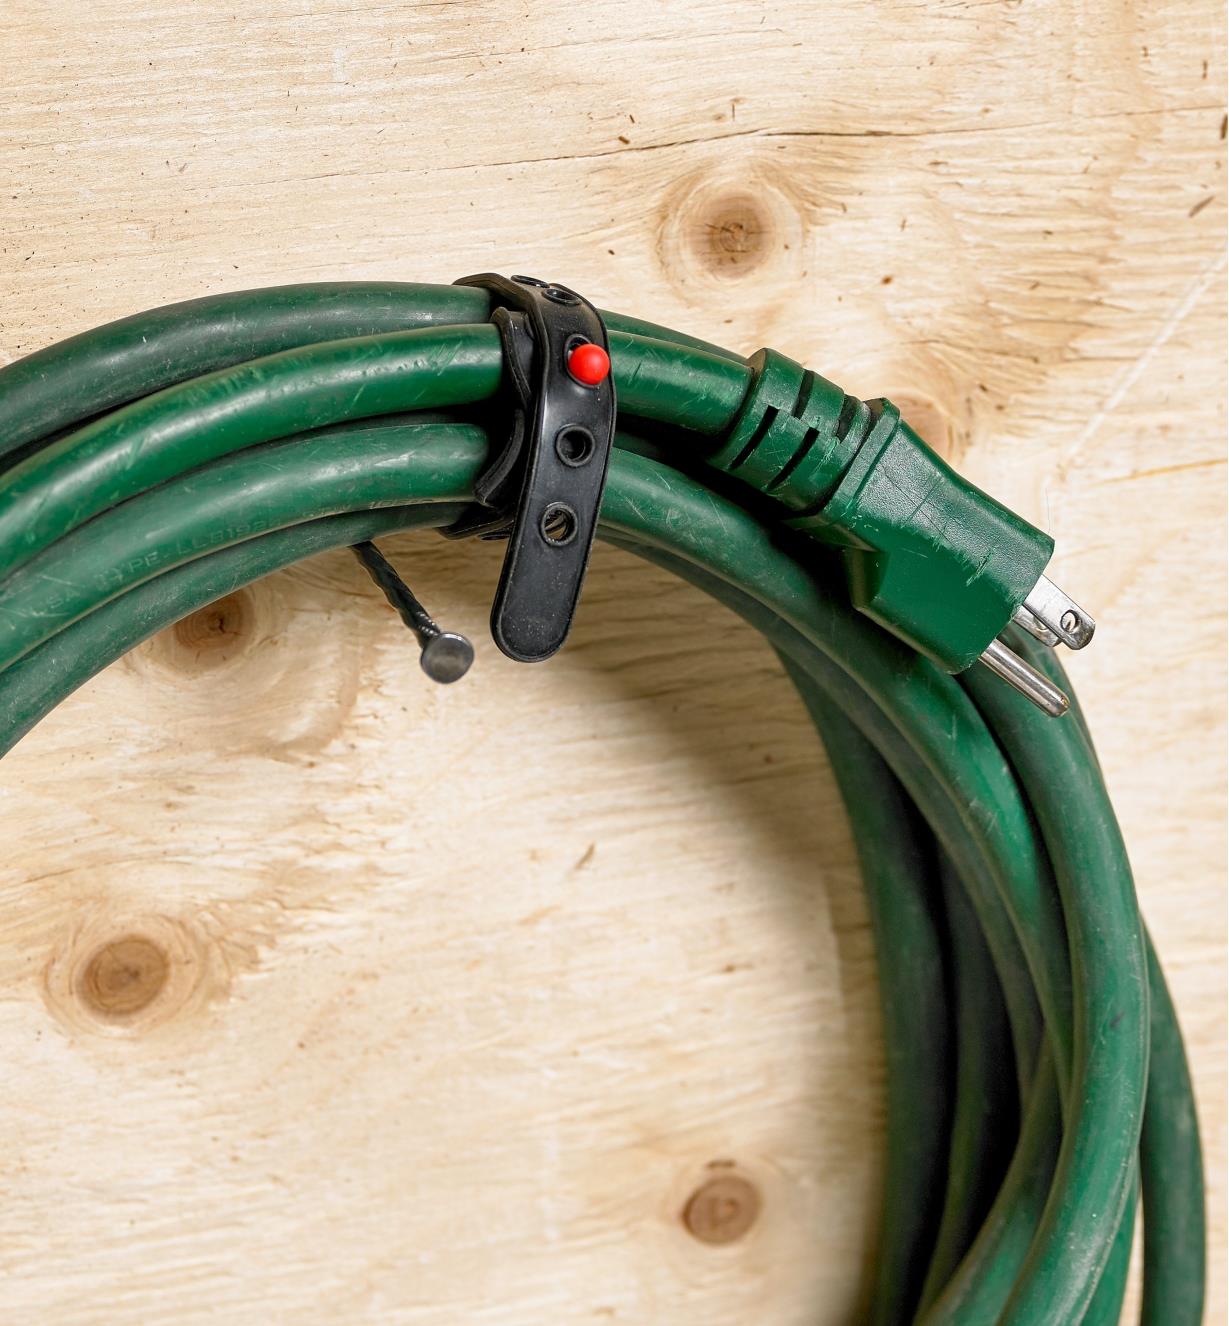 A coiled extension cord secured with a Wrap-N-Strap hanging on a wall